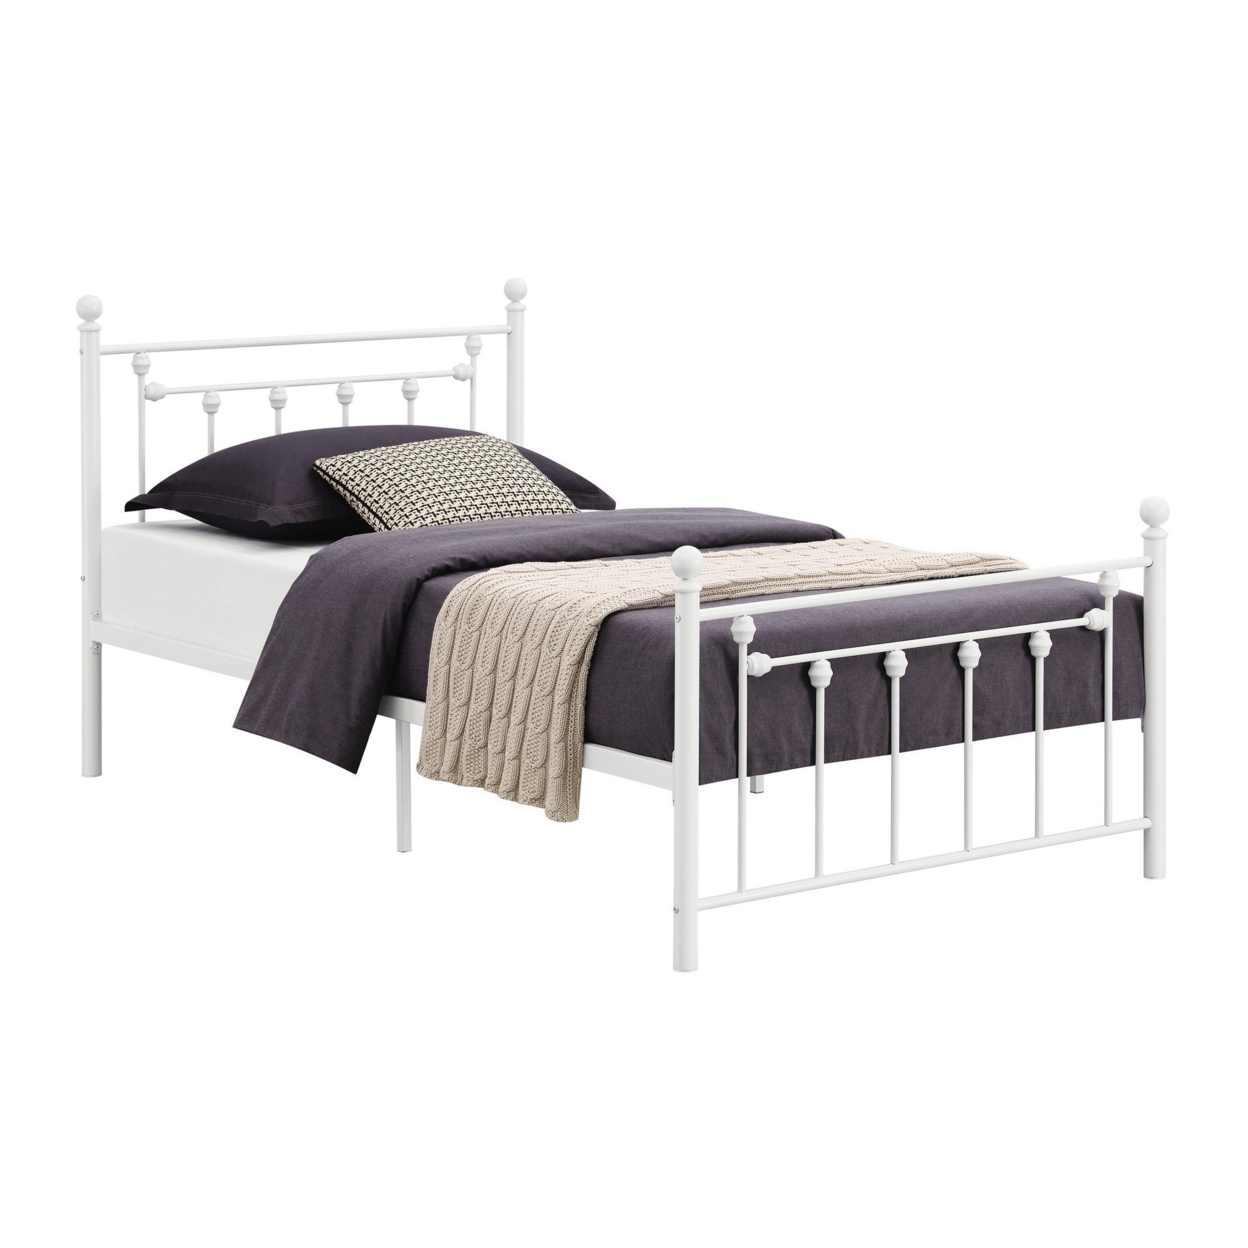 Dio 79 Inch Metal Twin Size Bed Frame, Spindle Design, Finial Posts, White